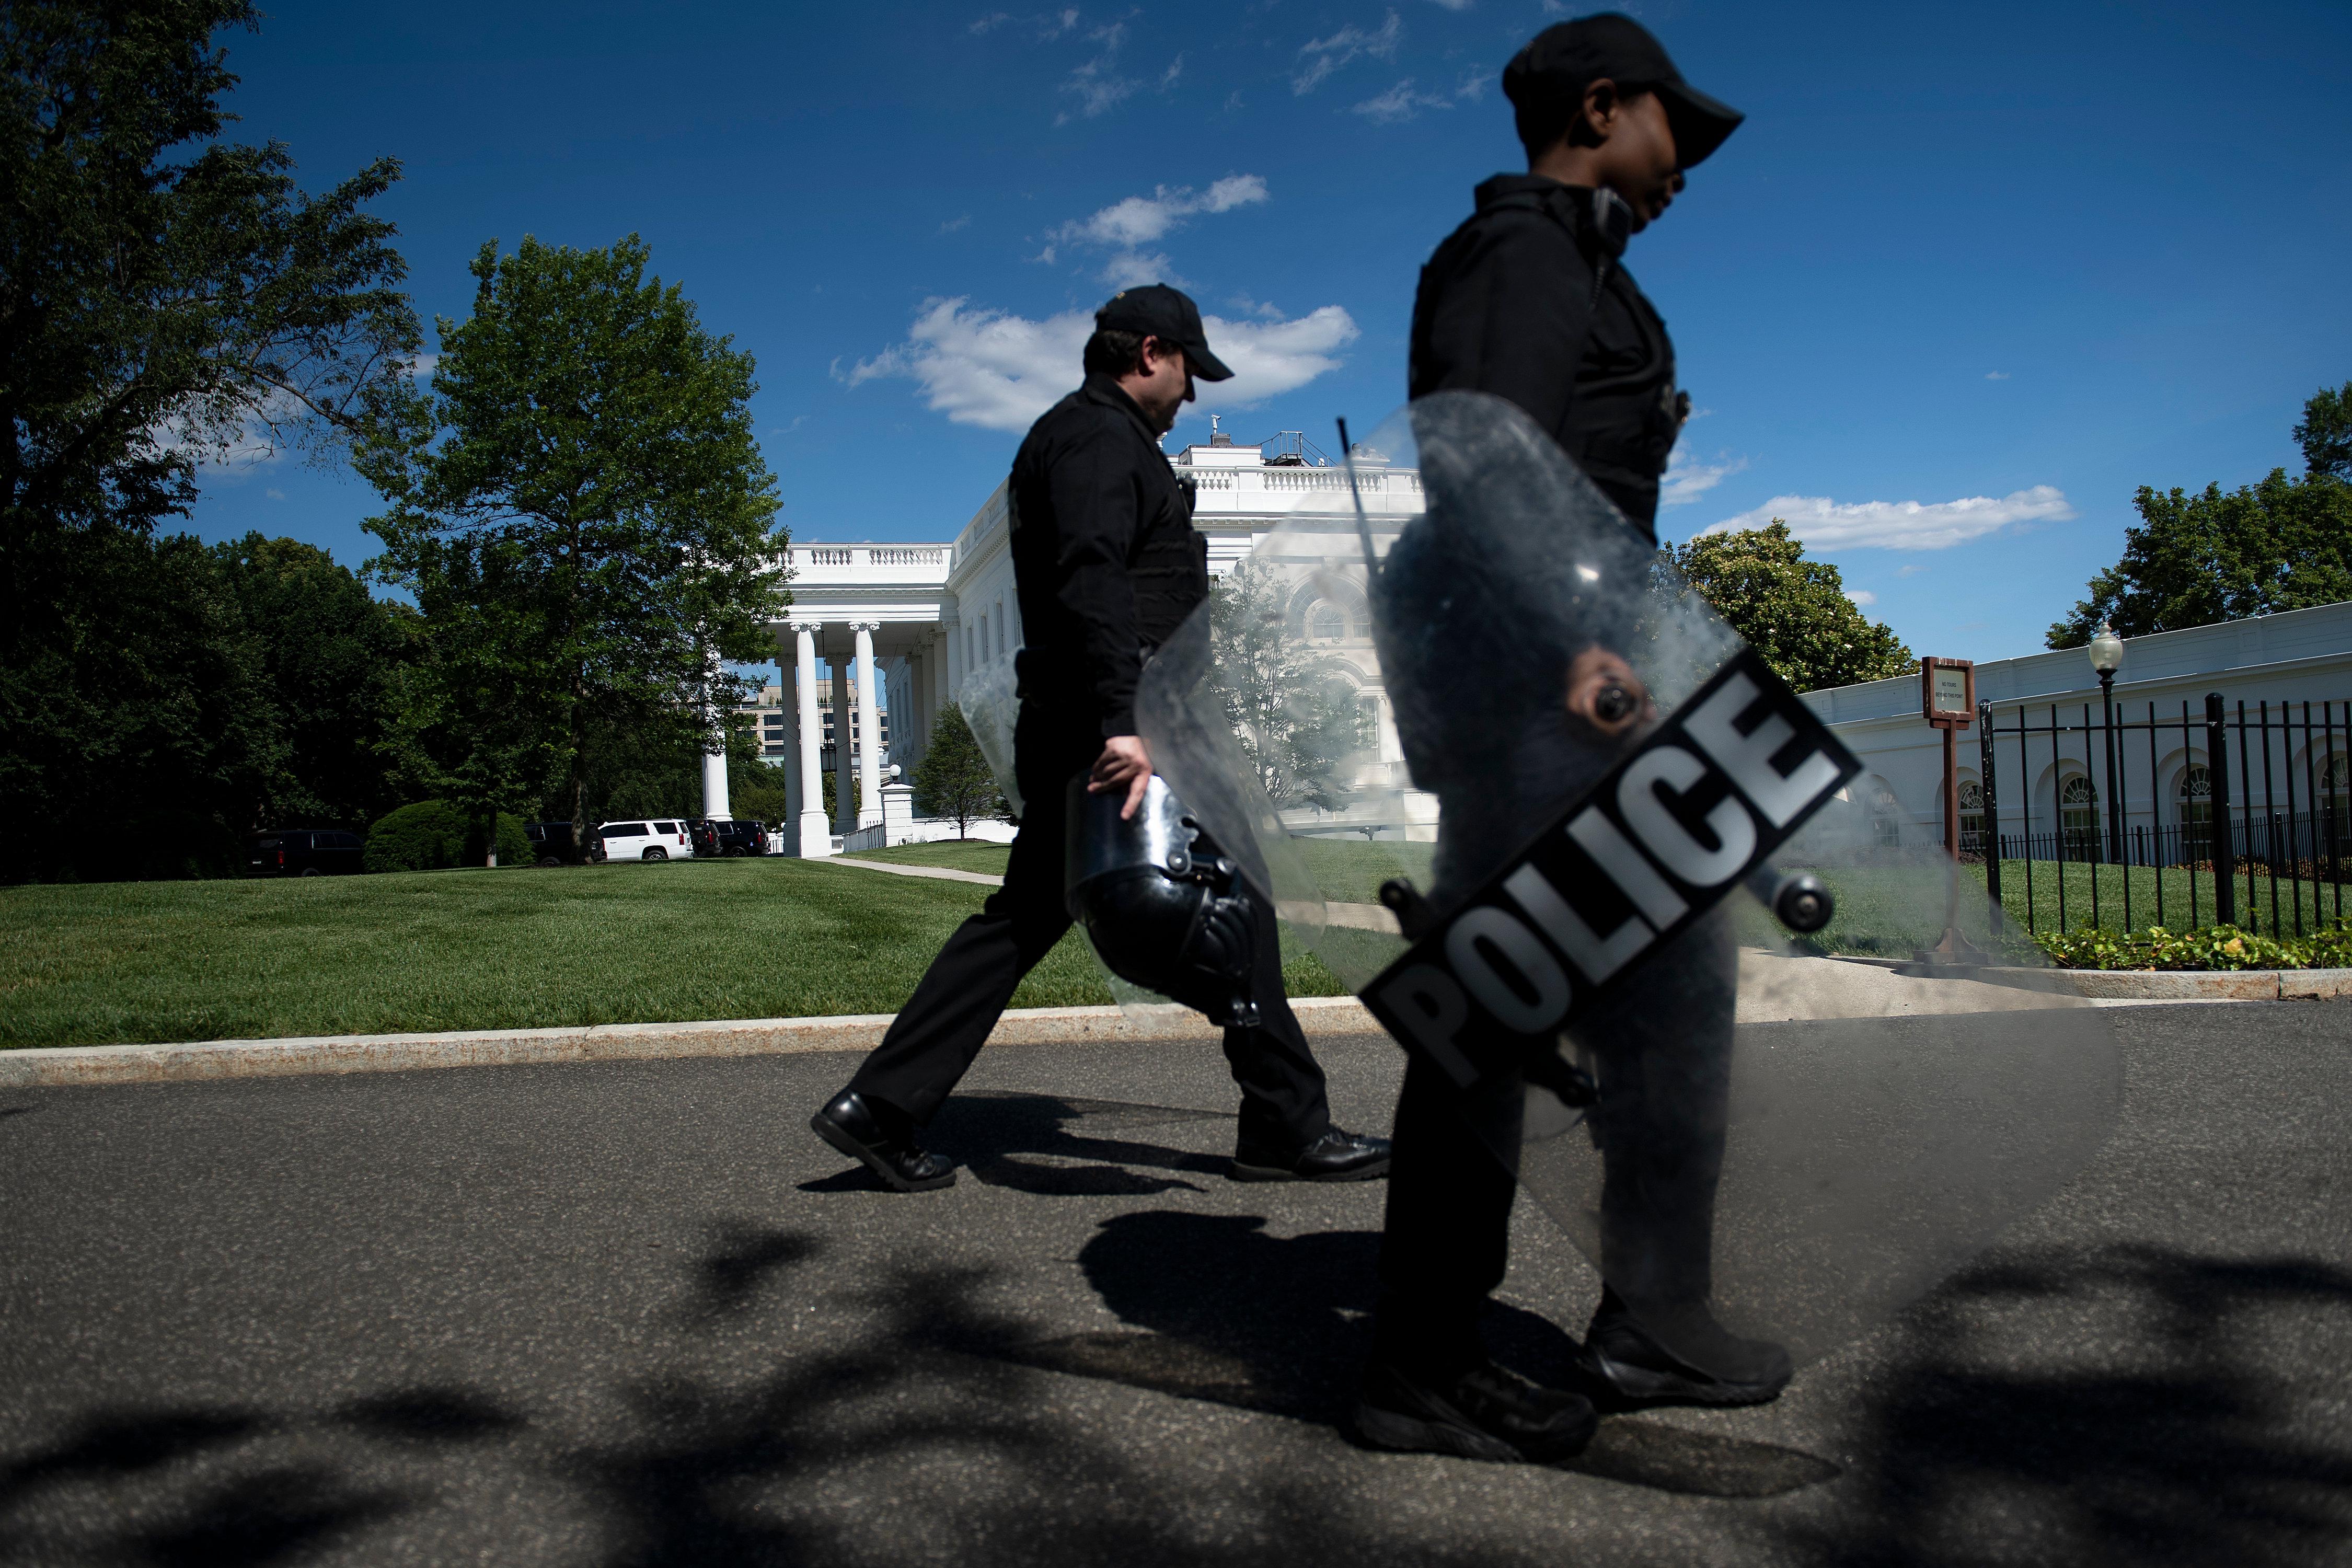 Members of the Secret Service walk past the White House as protests over the death of George Floyd continue on June 1, 2020, in Washington, D.C.